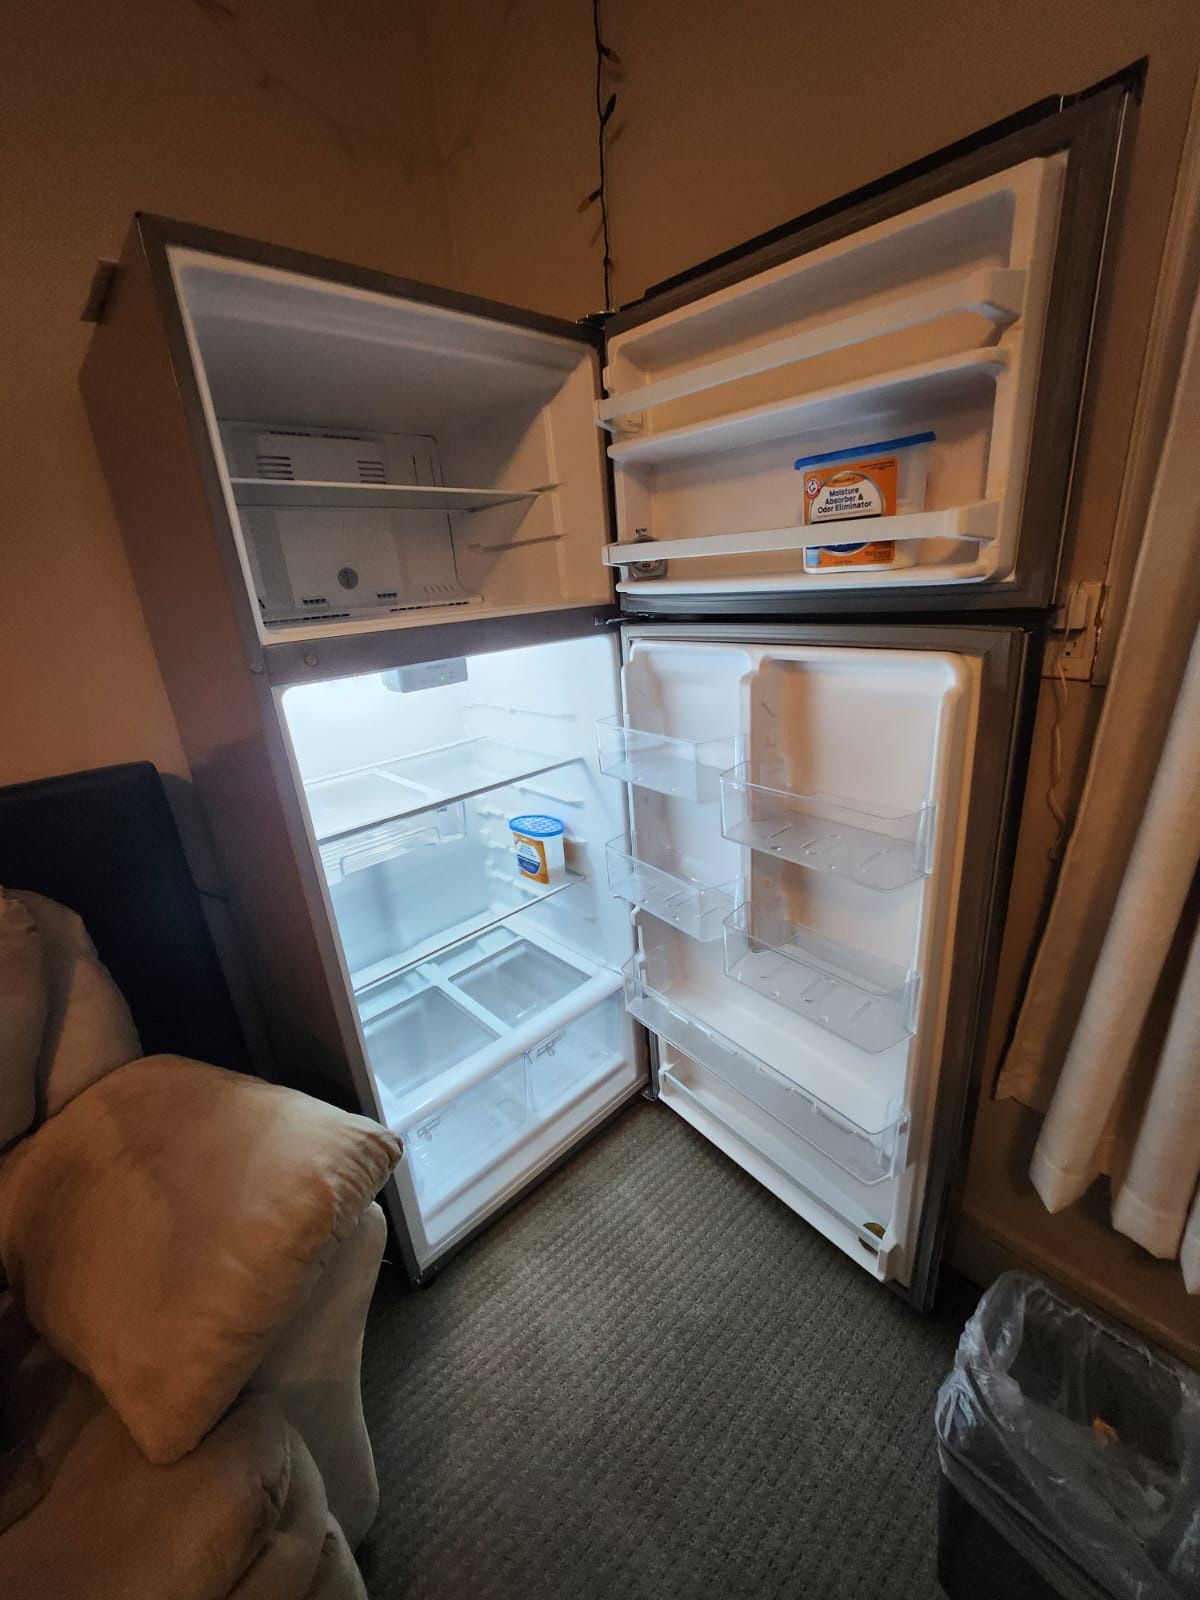 1 Year Old Fridge Great condition